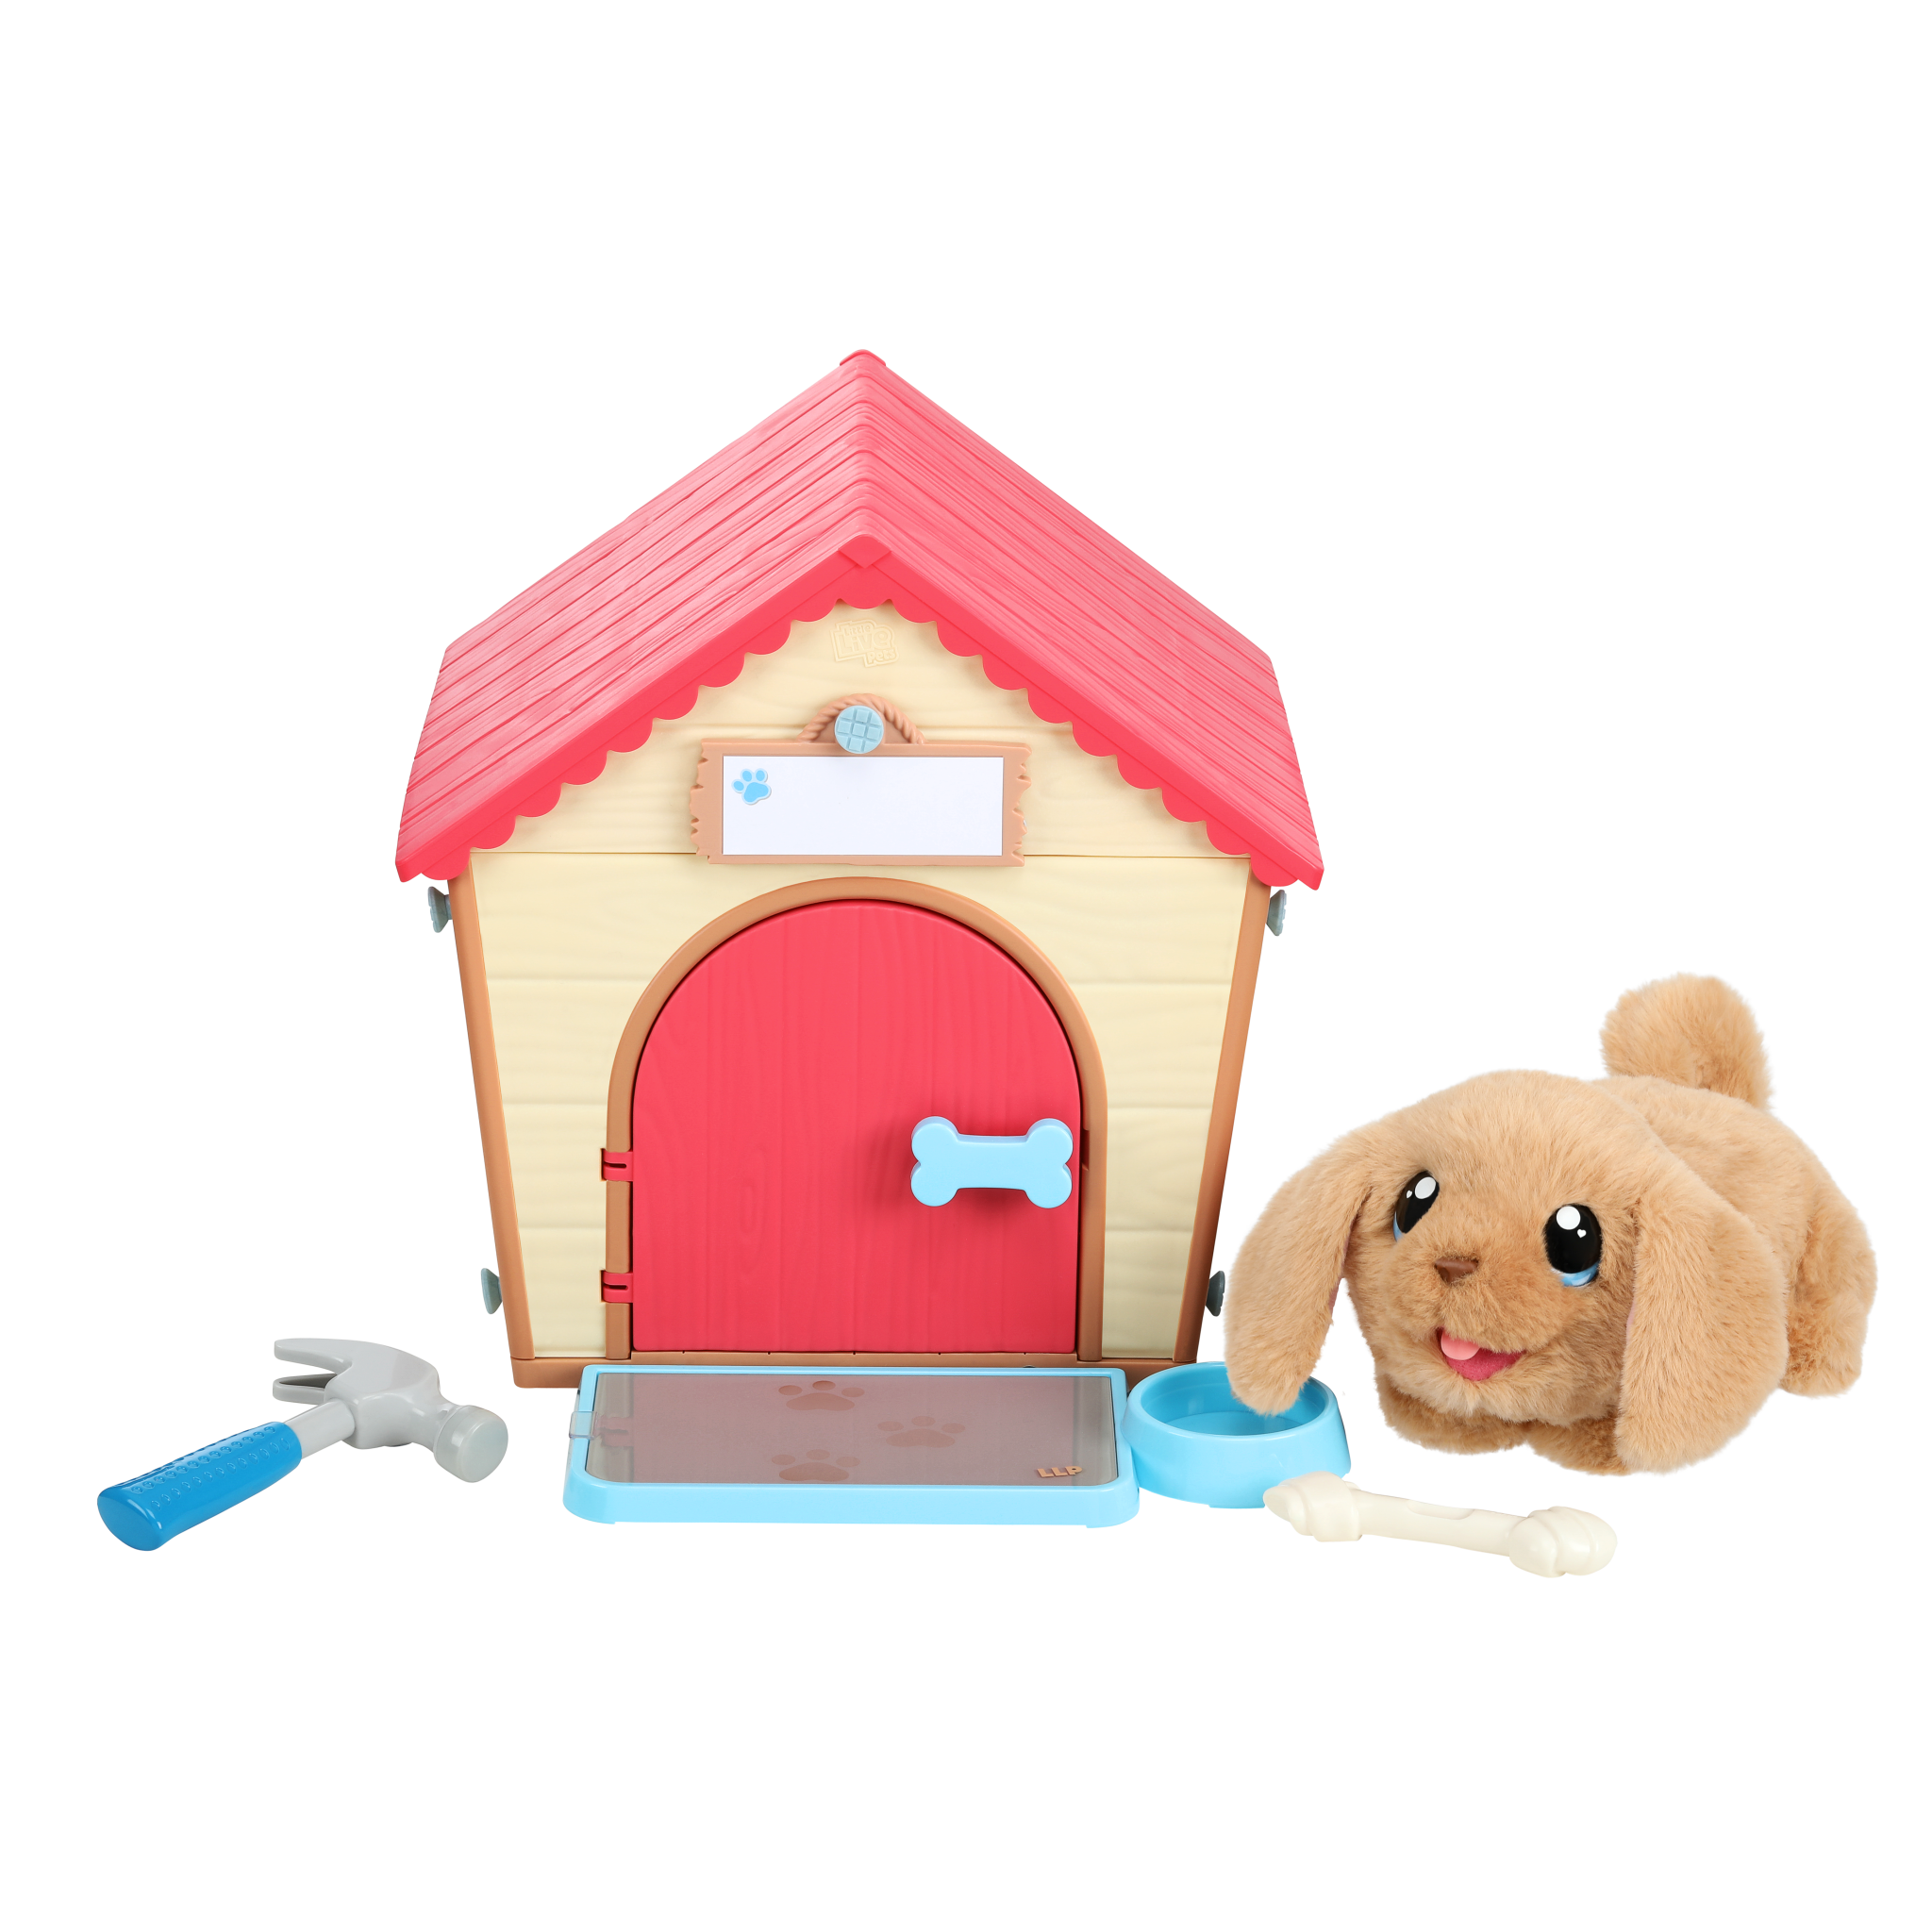 Little Live Pets - My Puppy's Home (26477)